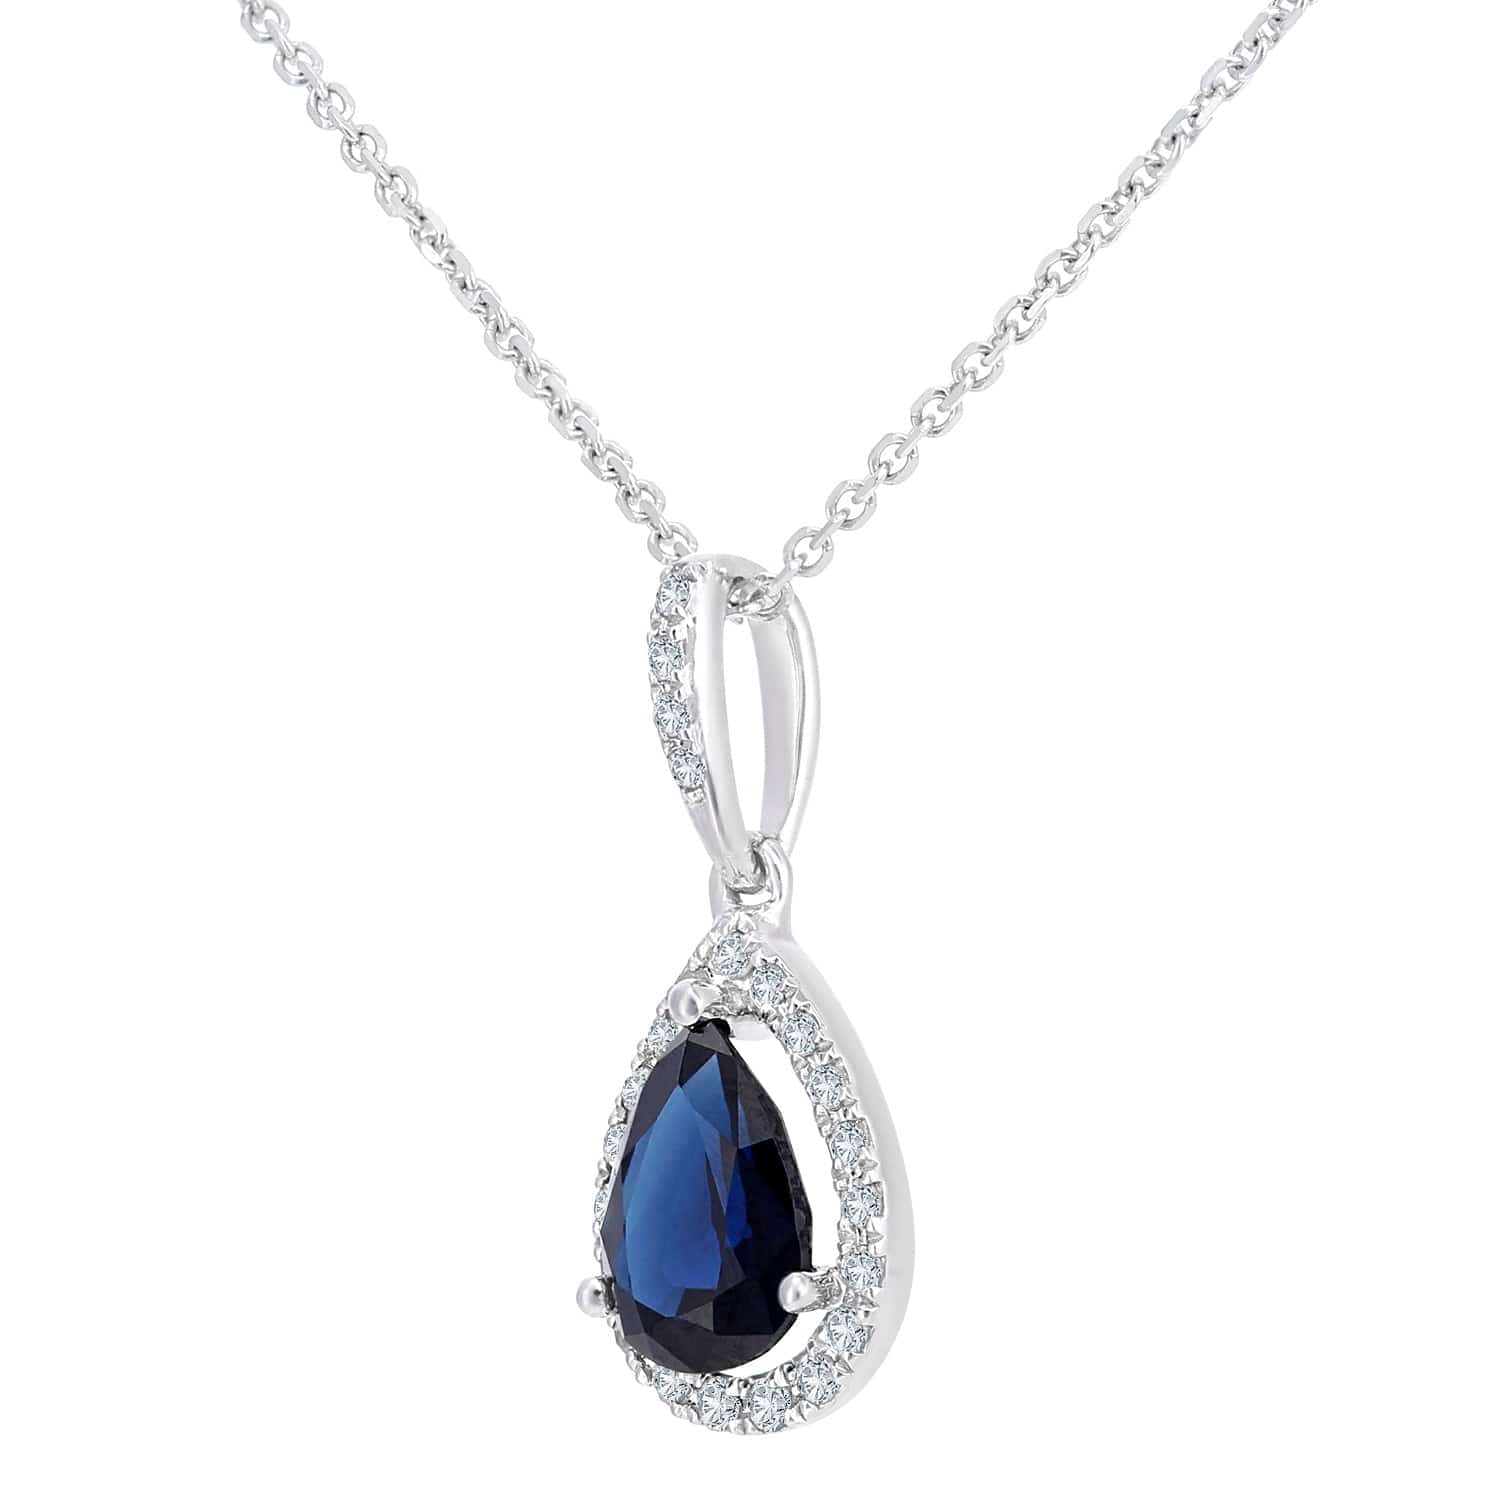 Lynora Luxe Pendant White Gold 9ct / Sapphire 9ct White Gold Sapphire and Diamond Teardrop Pendant Necklace